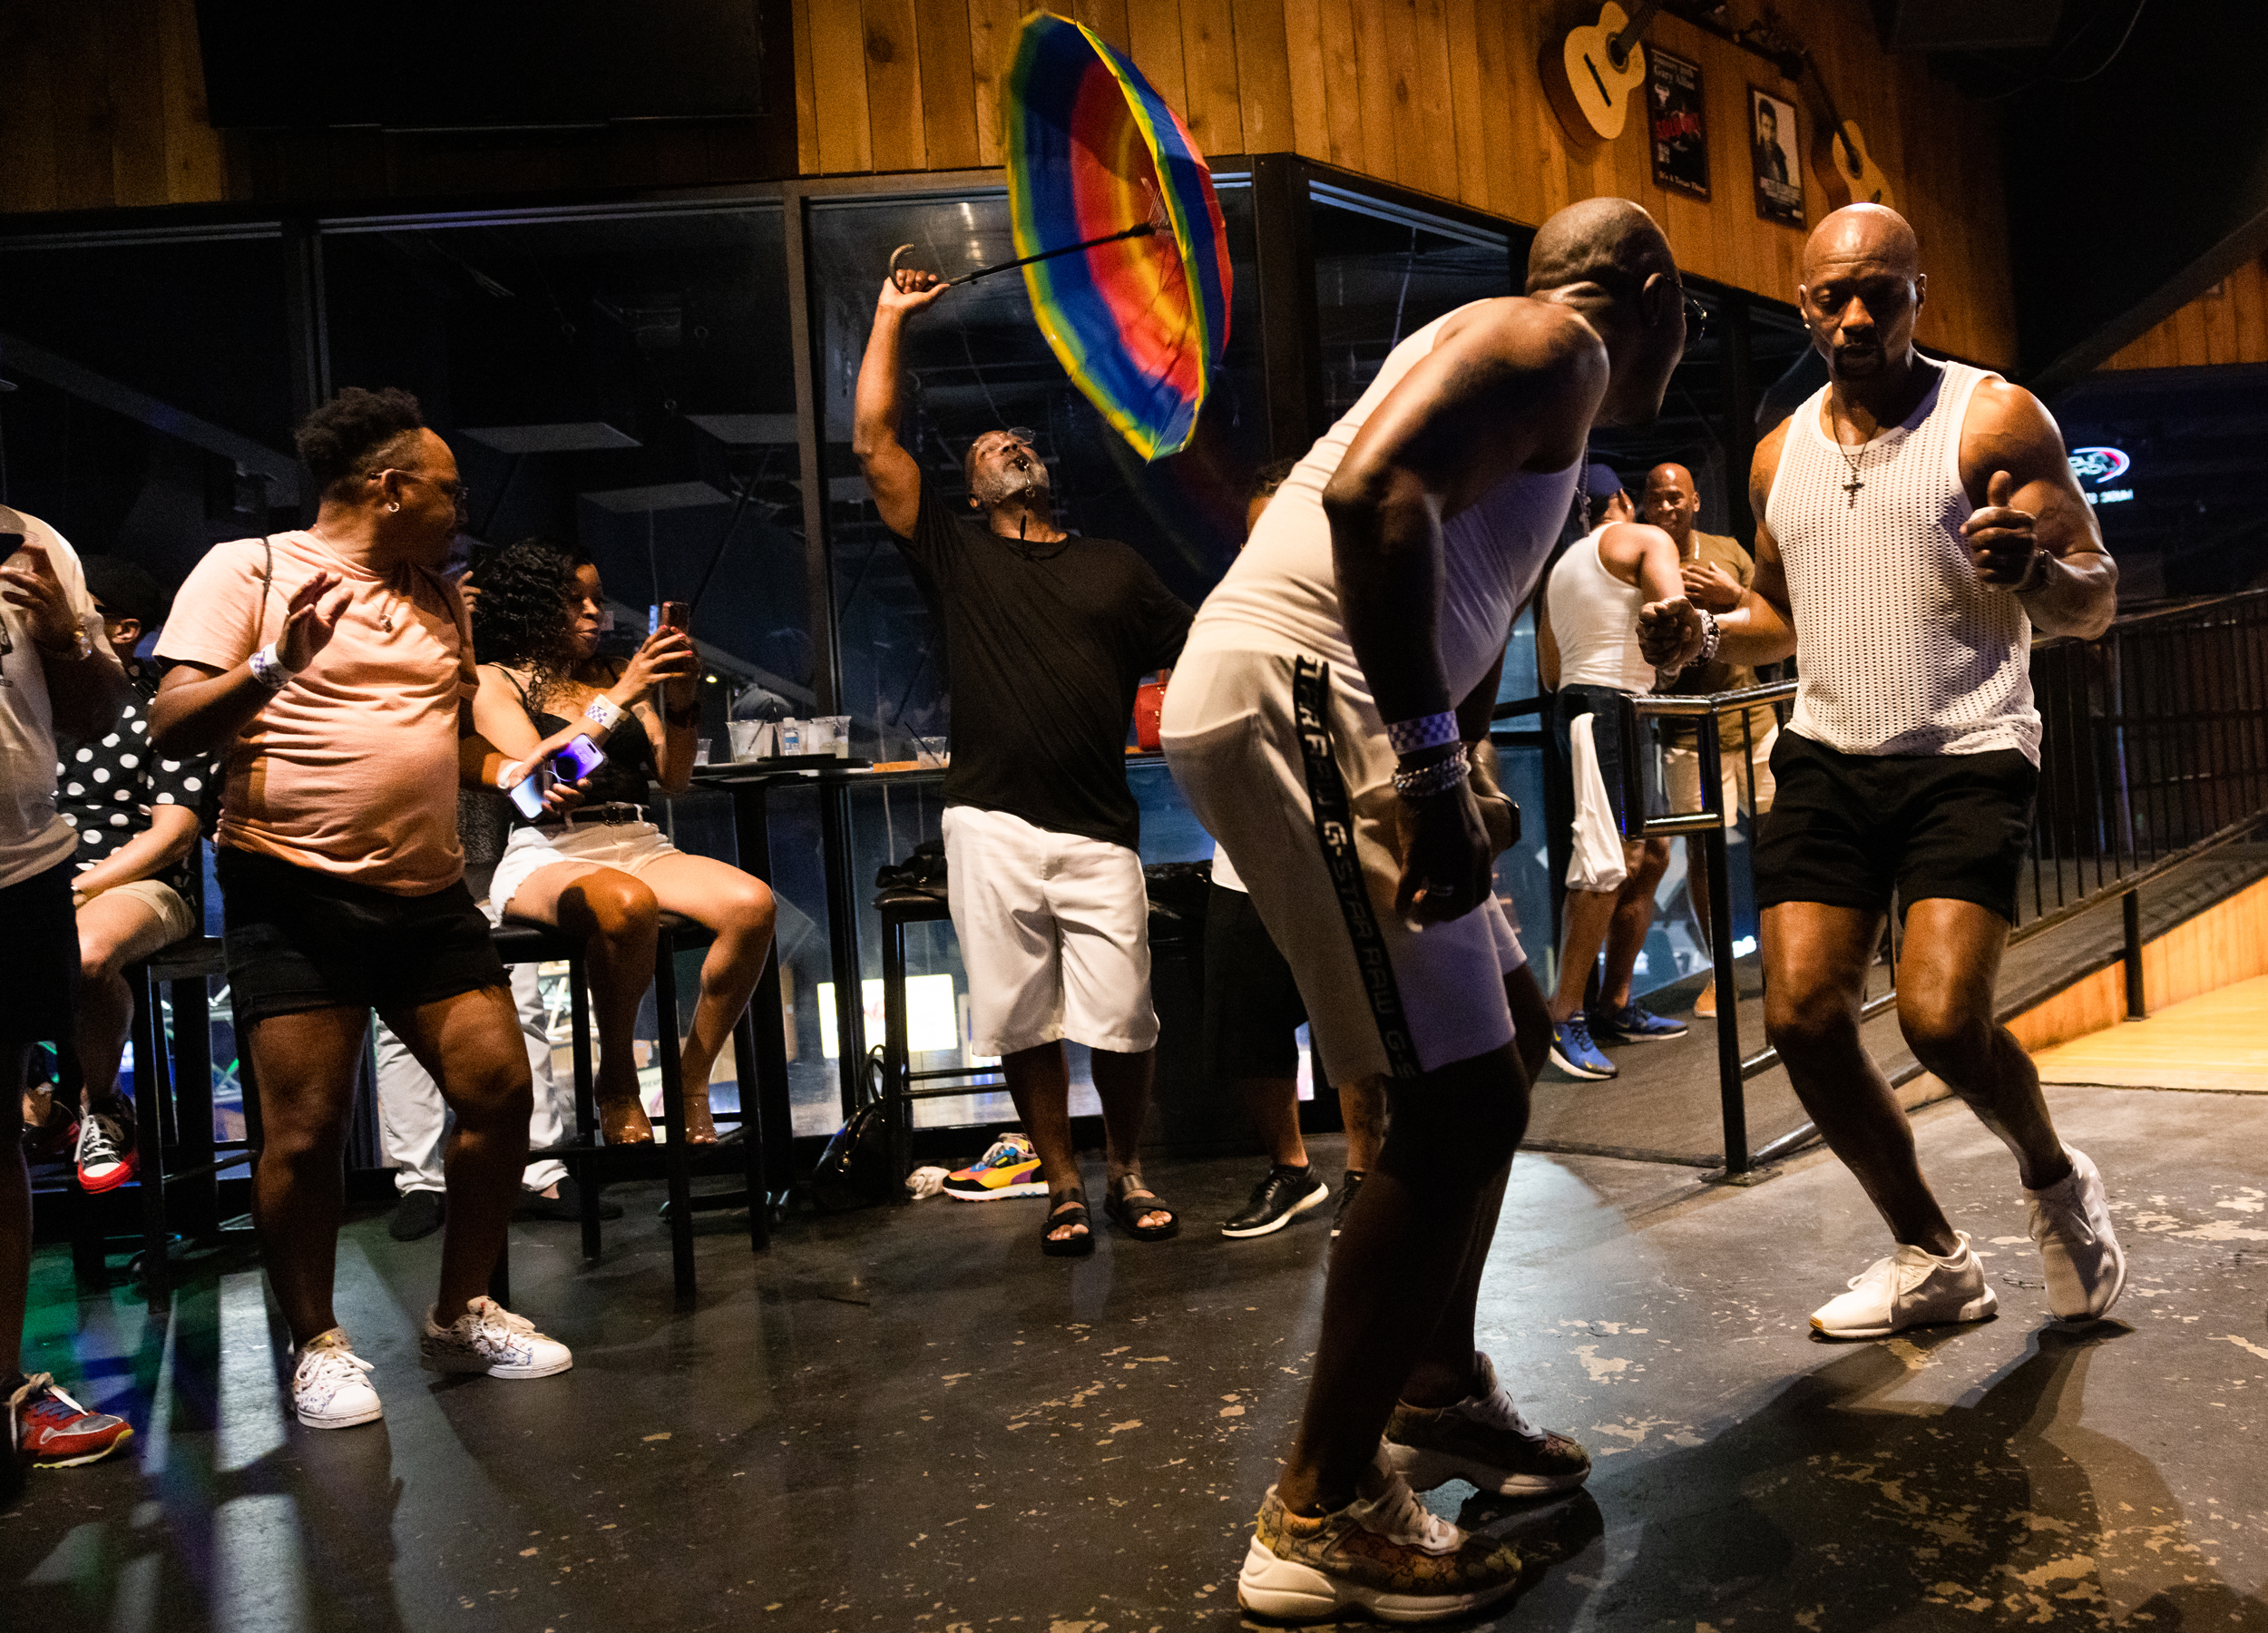 People dance during an LGBTQ event